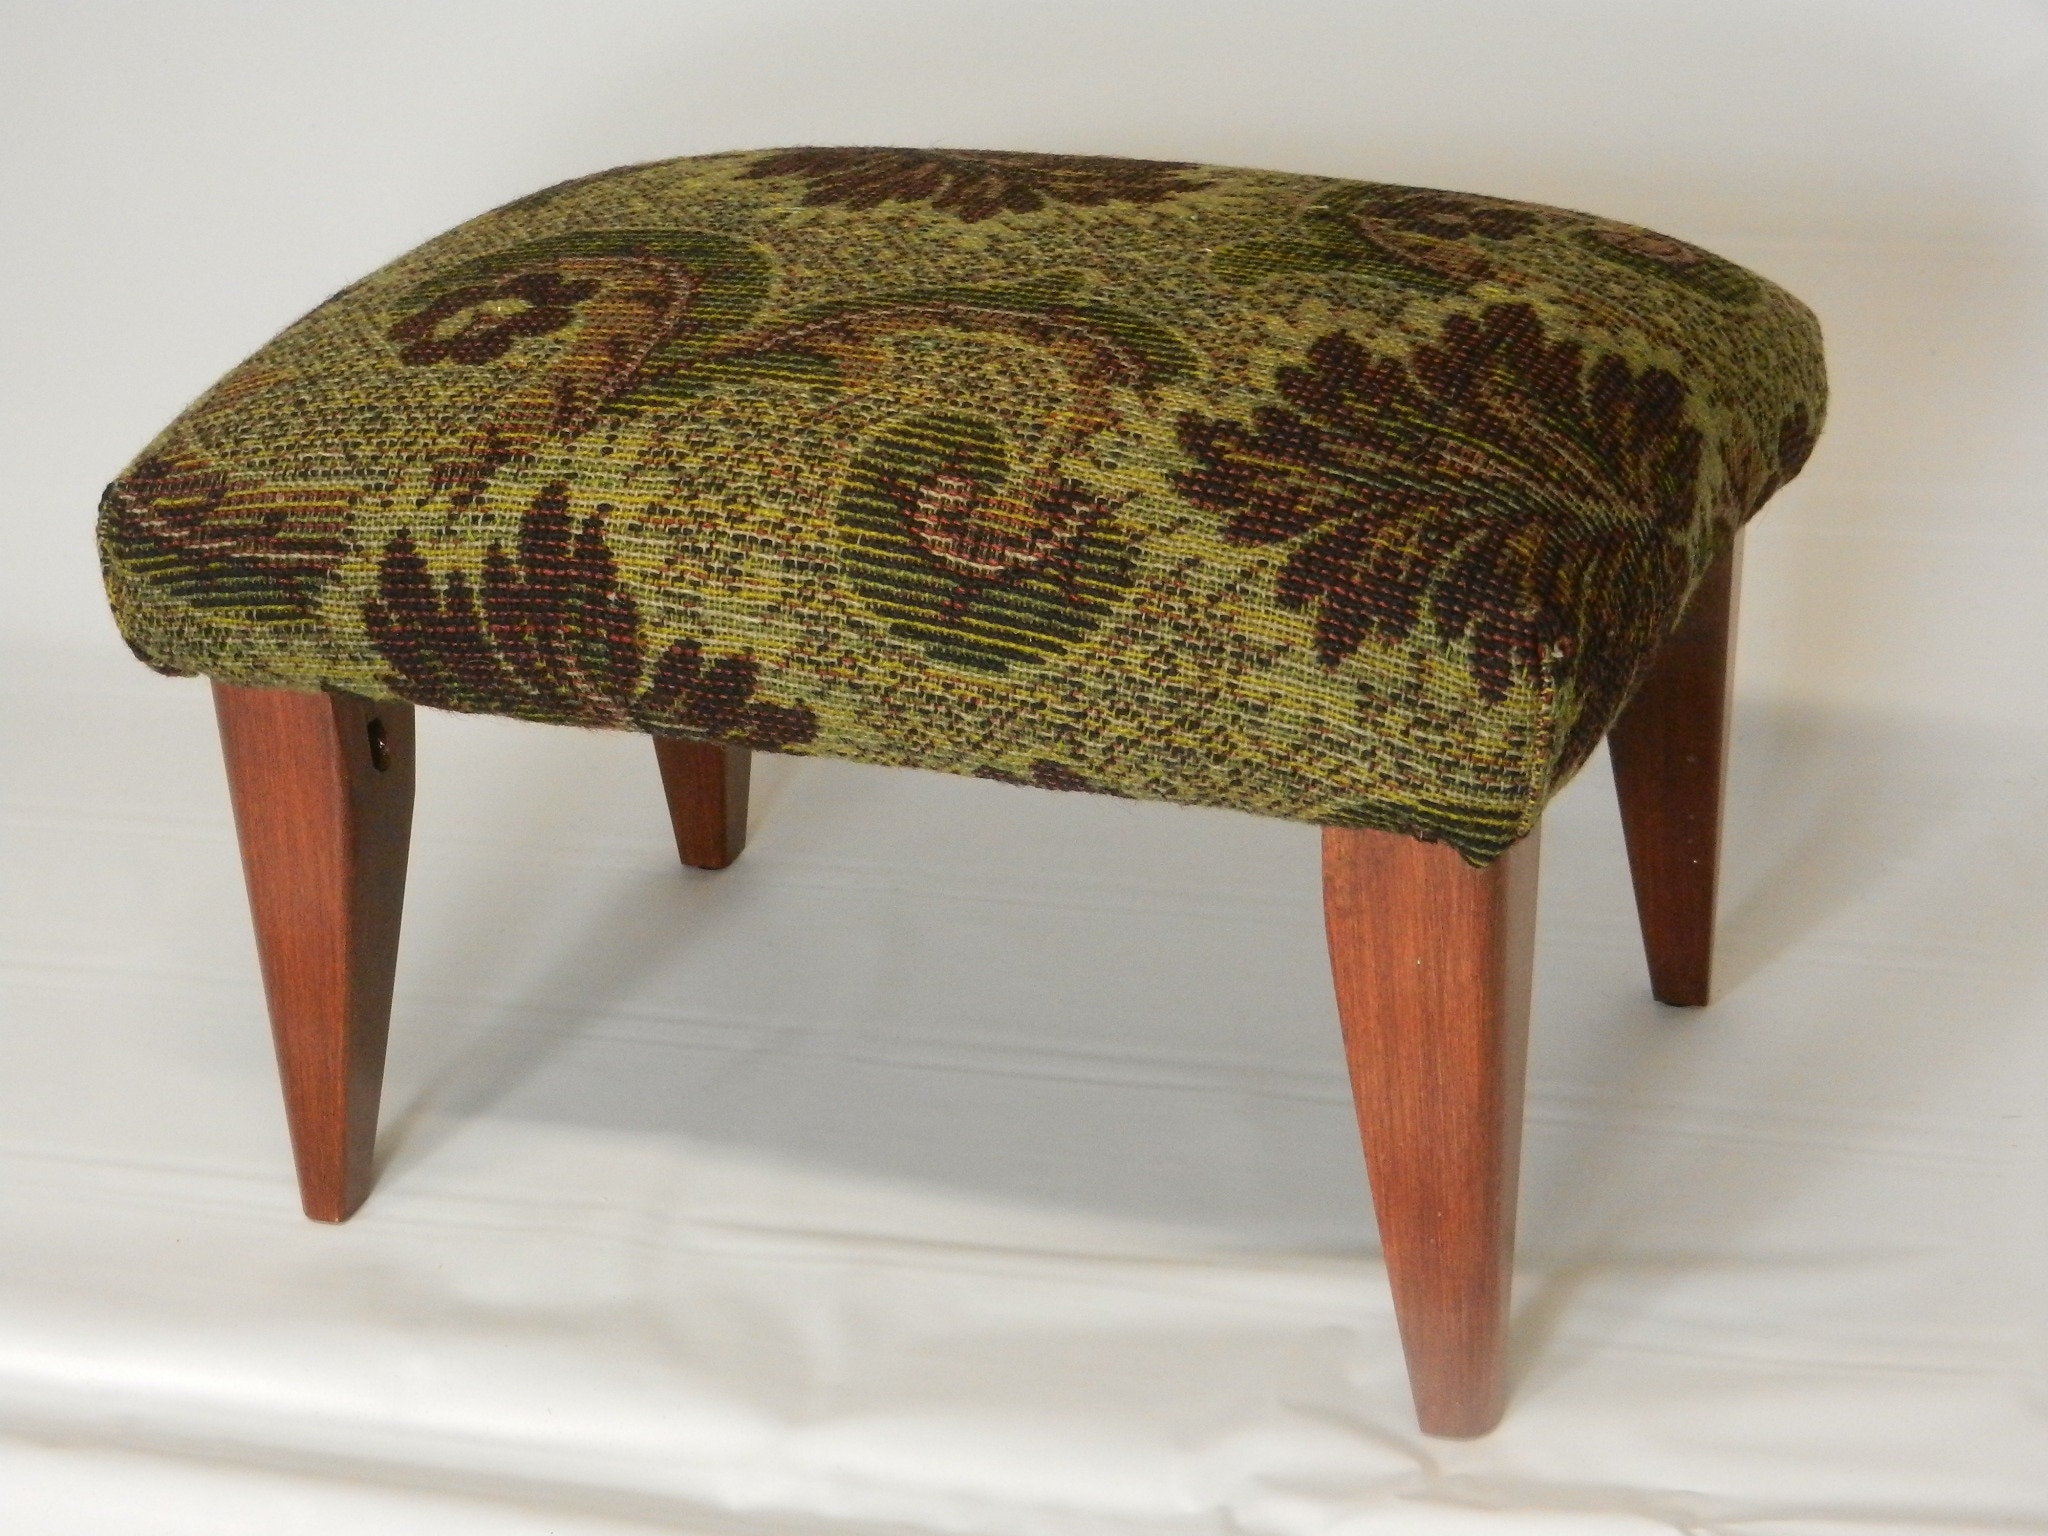 Foot Stools Cherry Finish Upholstered Foot Stool with Shapely Legs